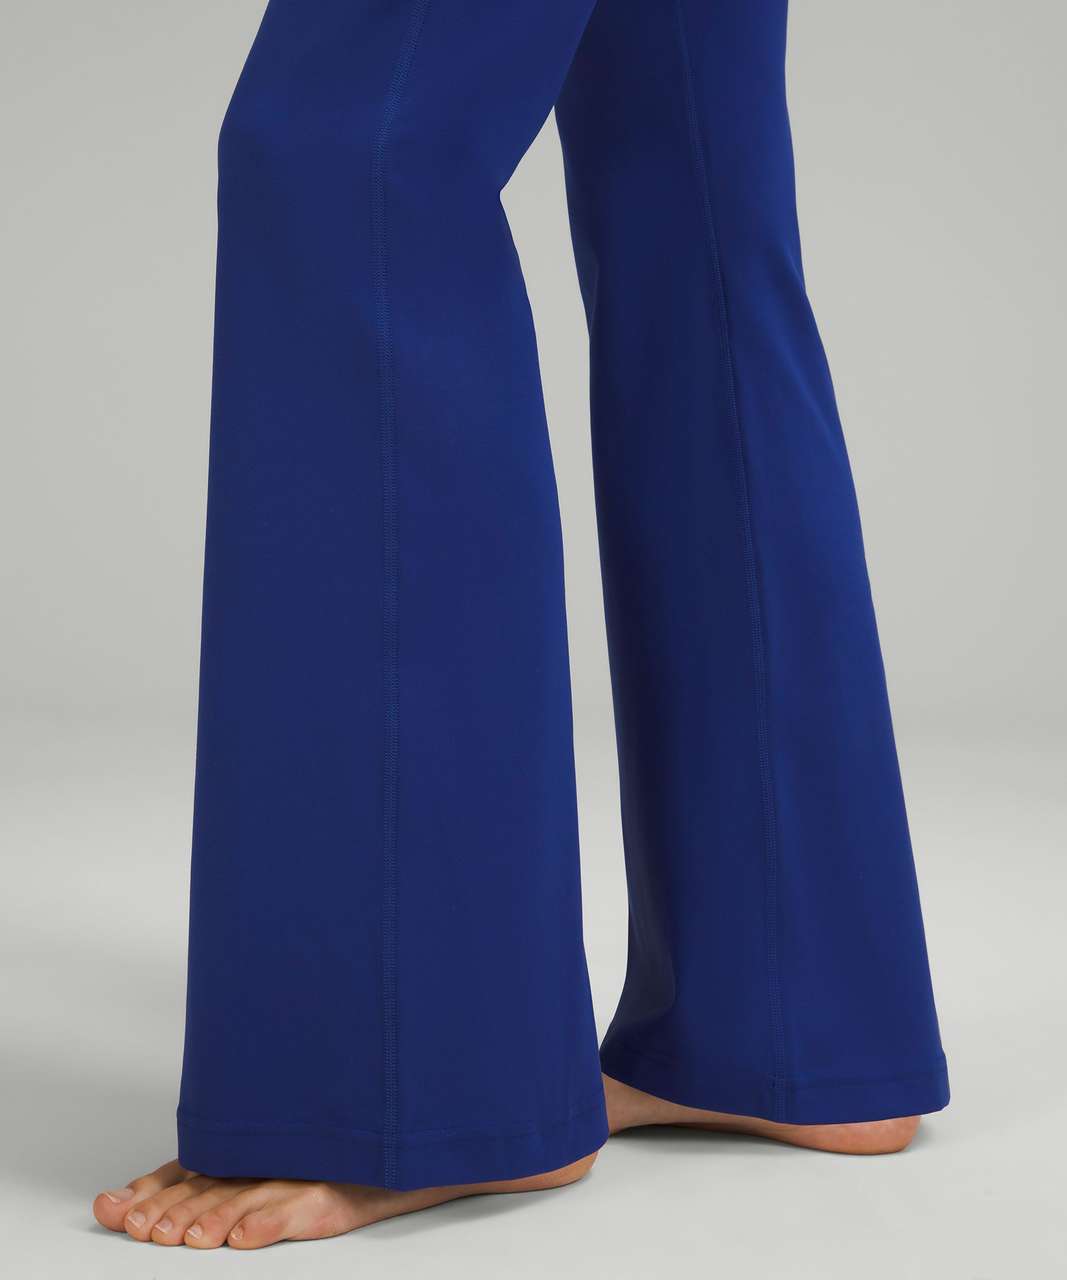 Lululemon Groove Pants Flare Super High-Rise Blue Size 6 - $45 (49% Off  Retail) - From Cassidy